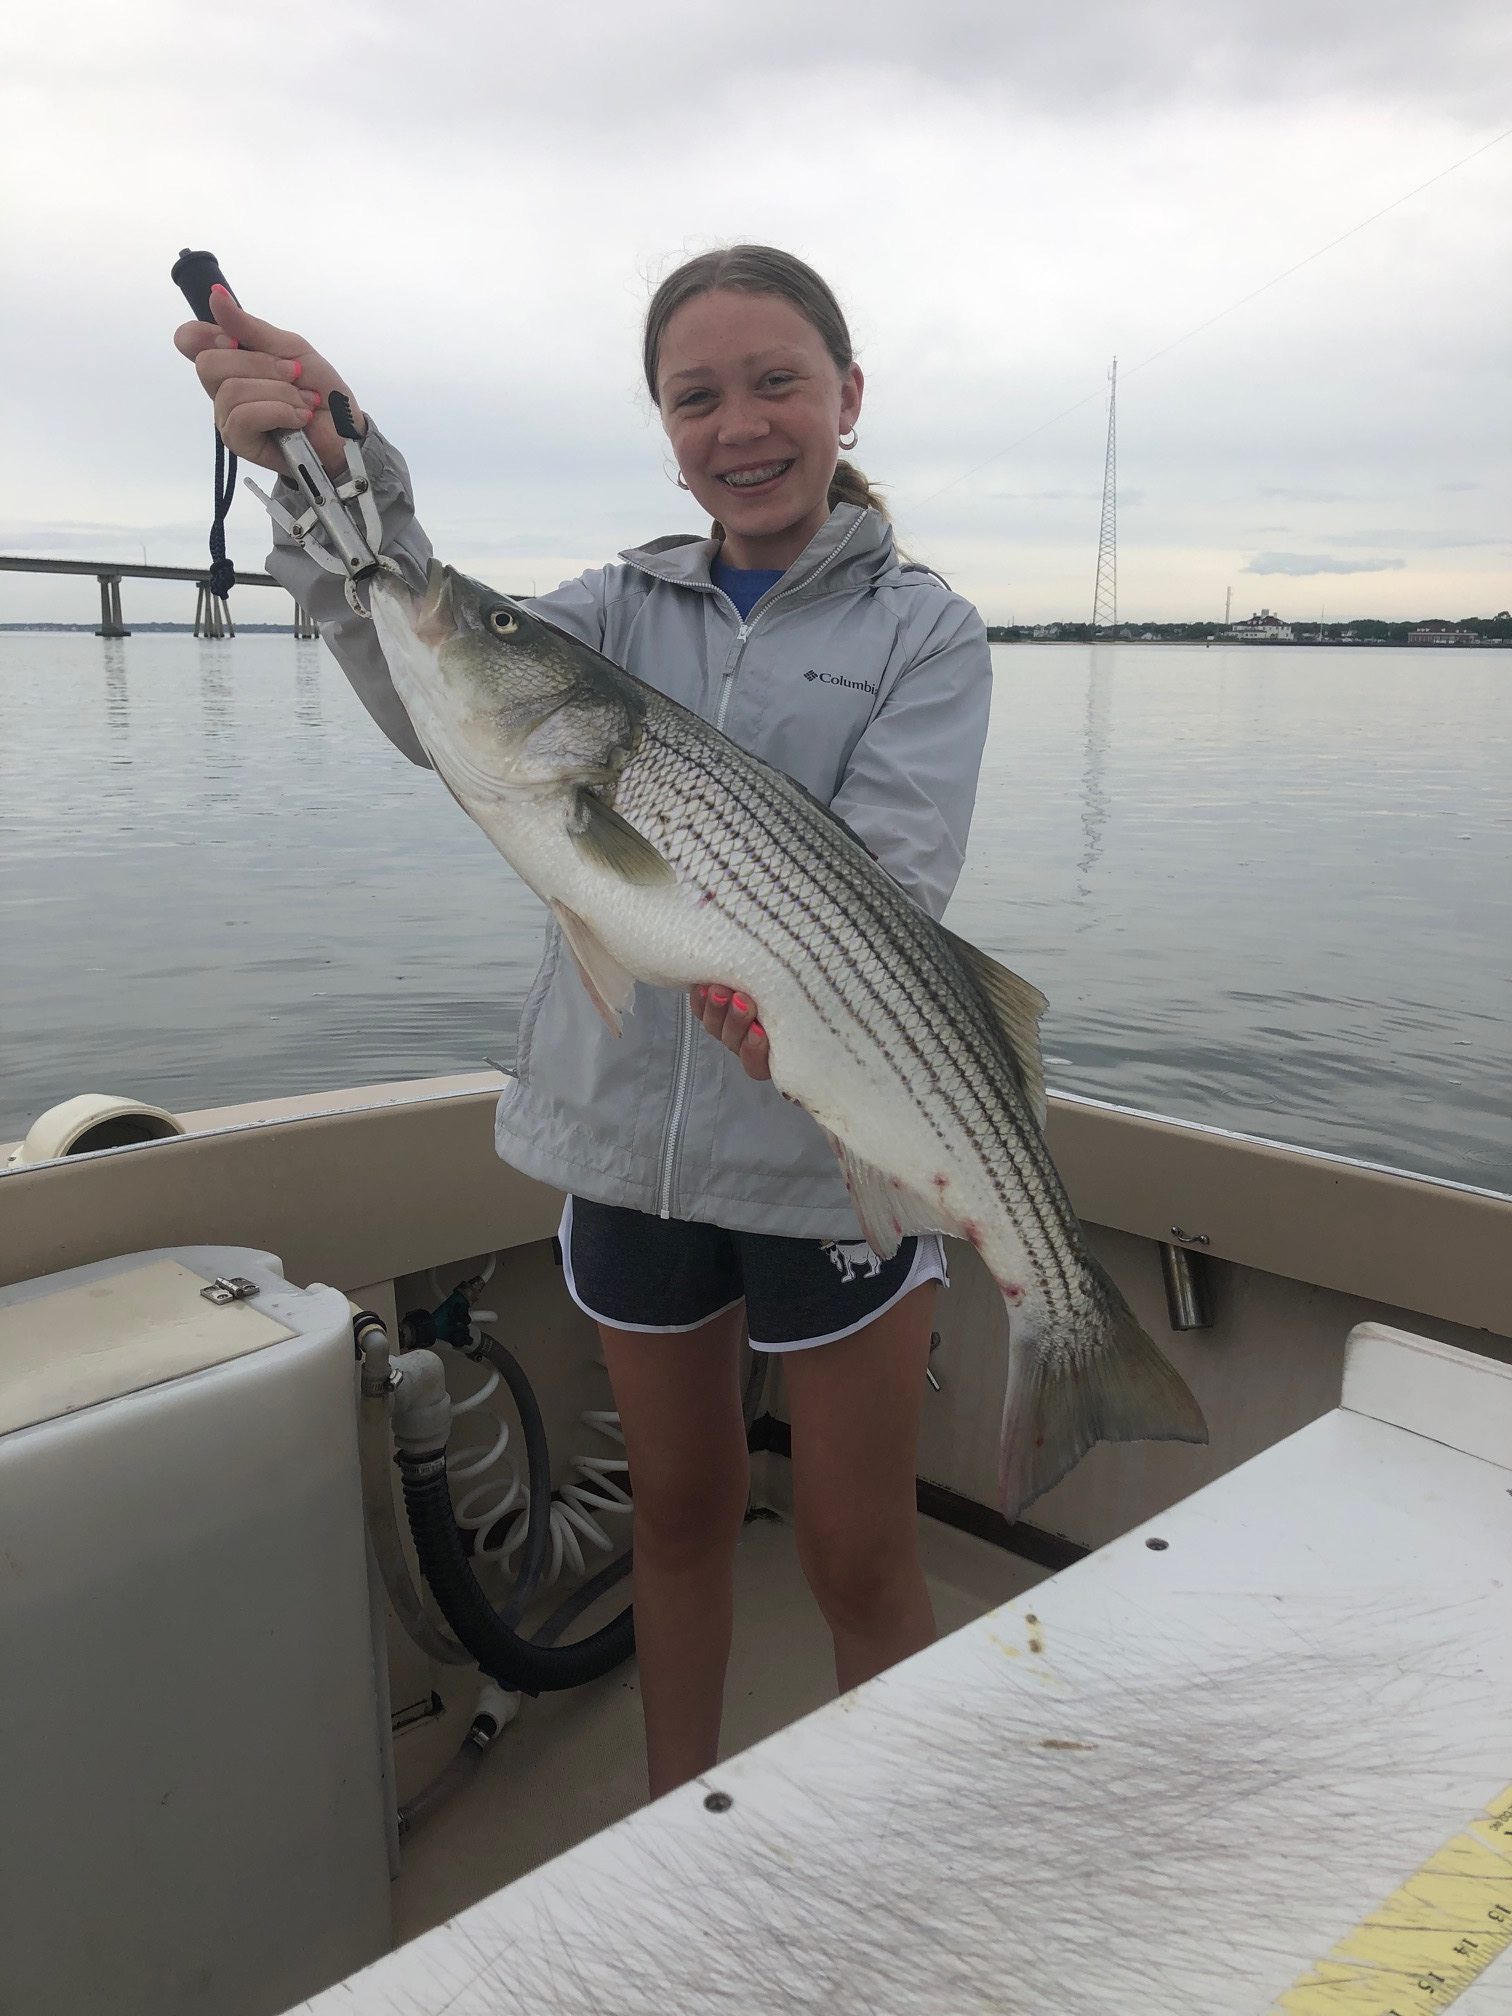 Charleigh Ries caught this nice 33-inch striped bass while fishing with her dad, Capt. Brad Ries of Someday Came Charters, in Shinnecock Bay recently.